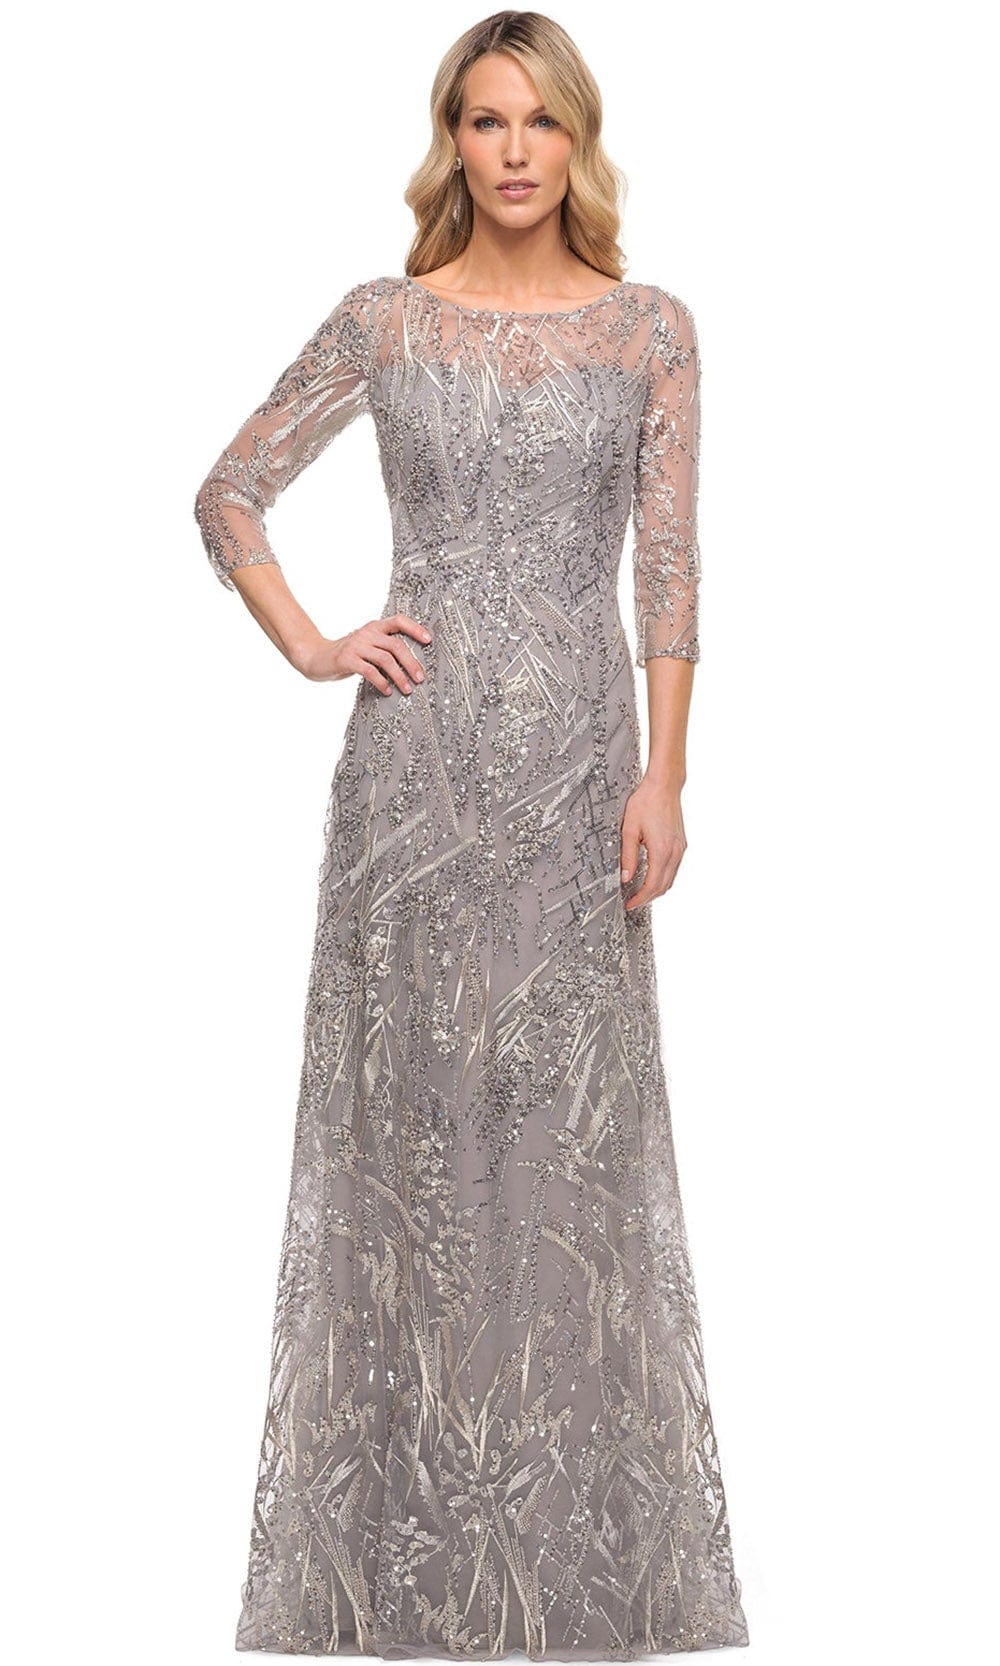 Image of La Femme 30161 - Embroidered Sheer Lace A-Line Mother of the Groom Dress